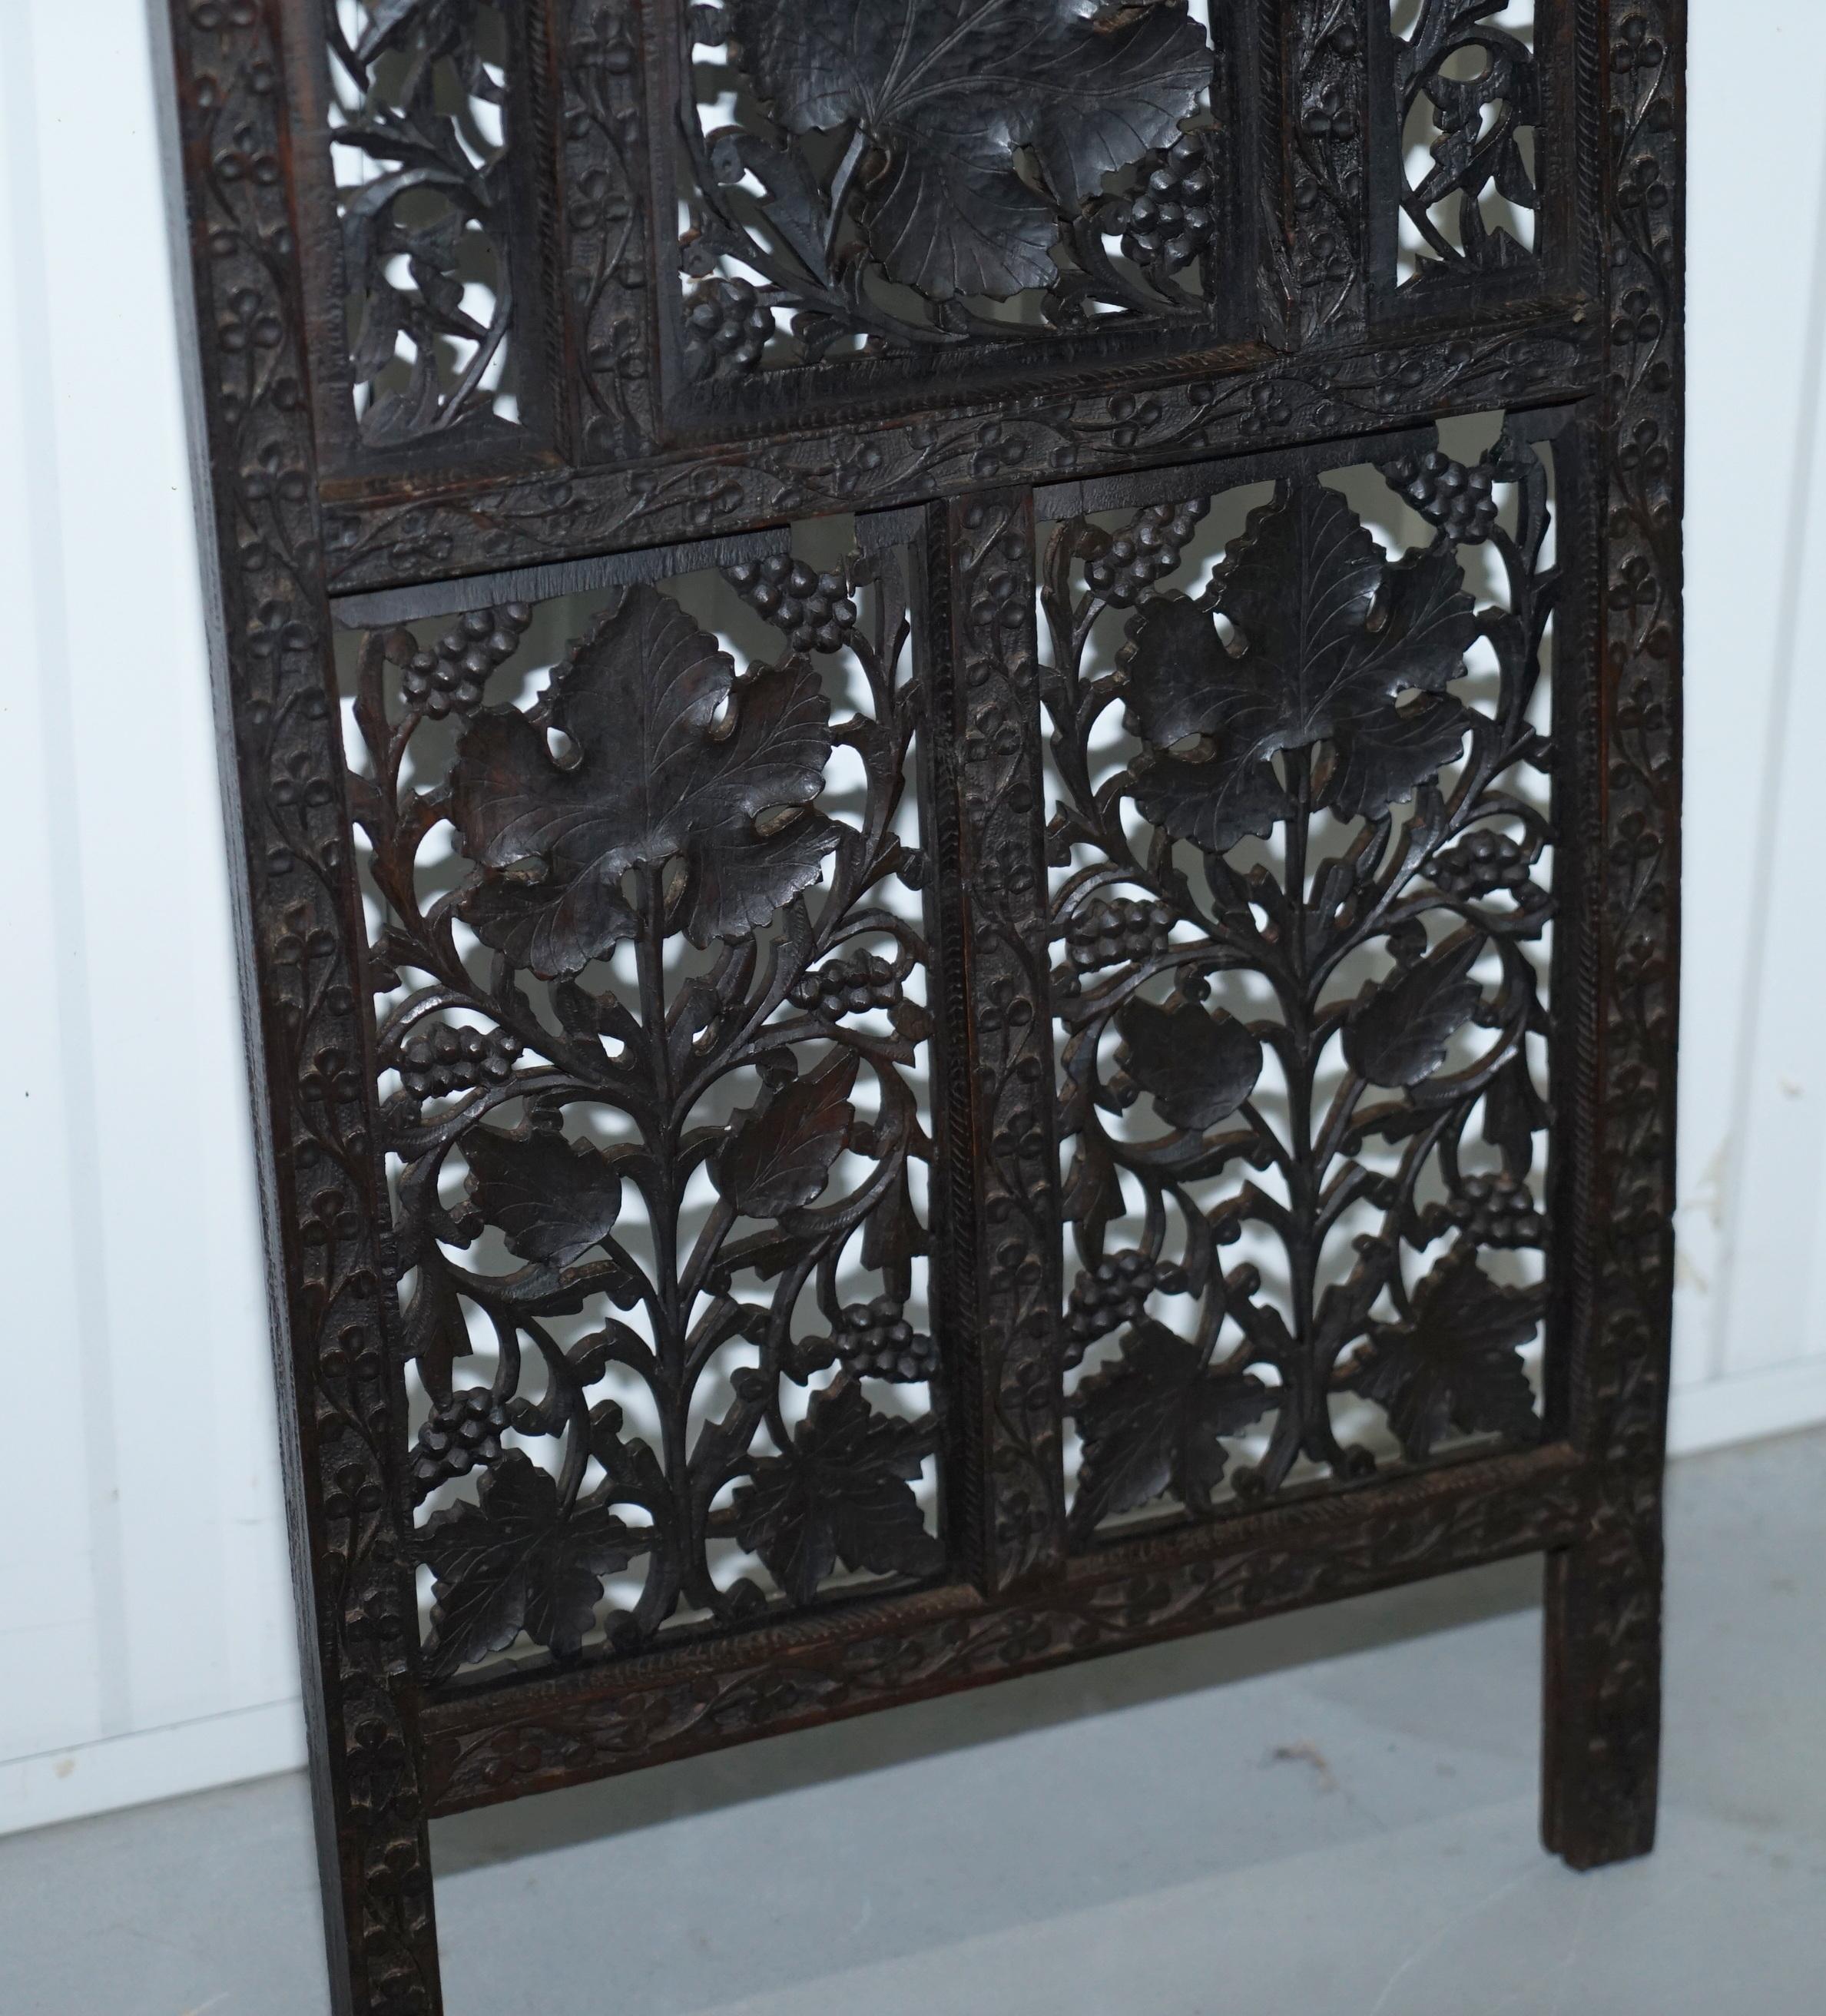 Rare Chinese Fretwork Carved Wall Panels Depicting Leaves Solid Teak Art Wood 5